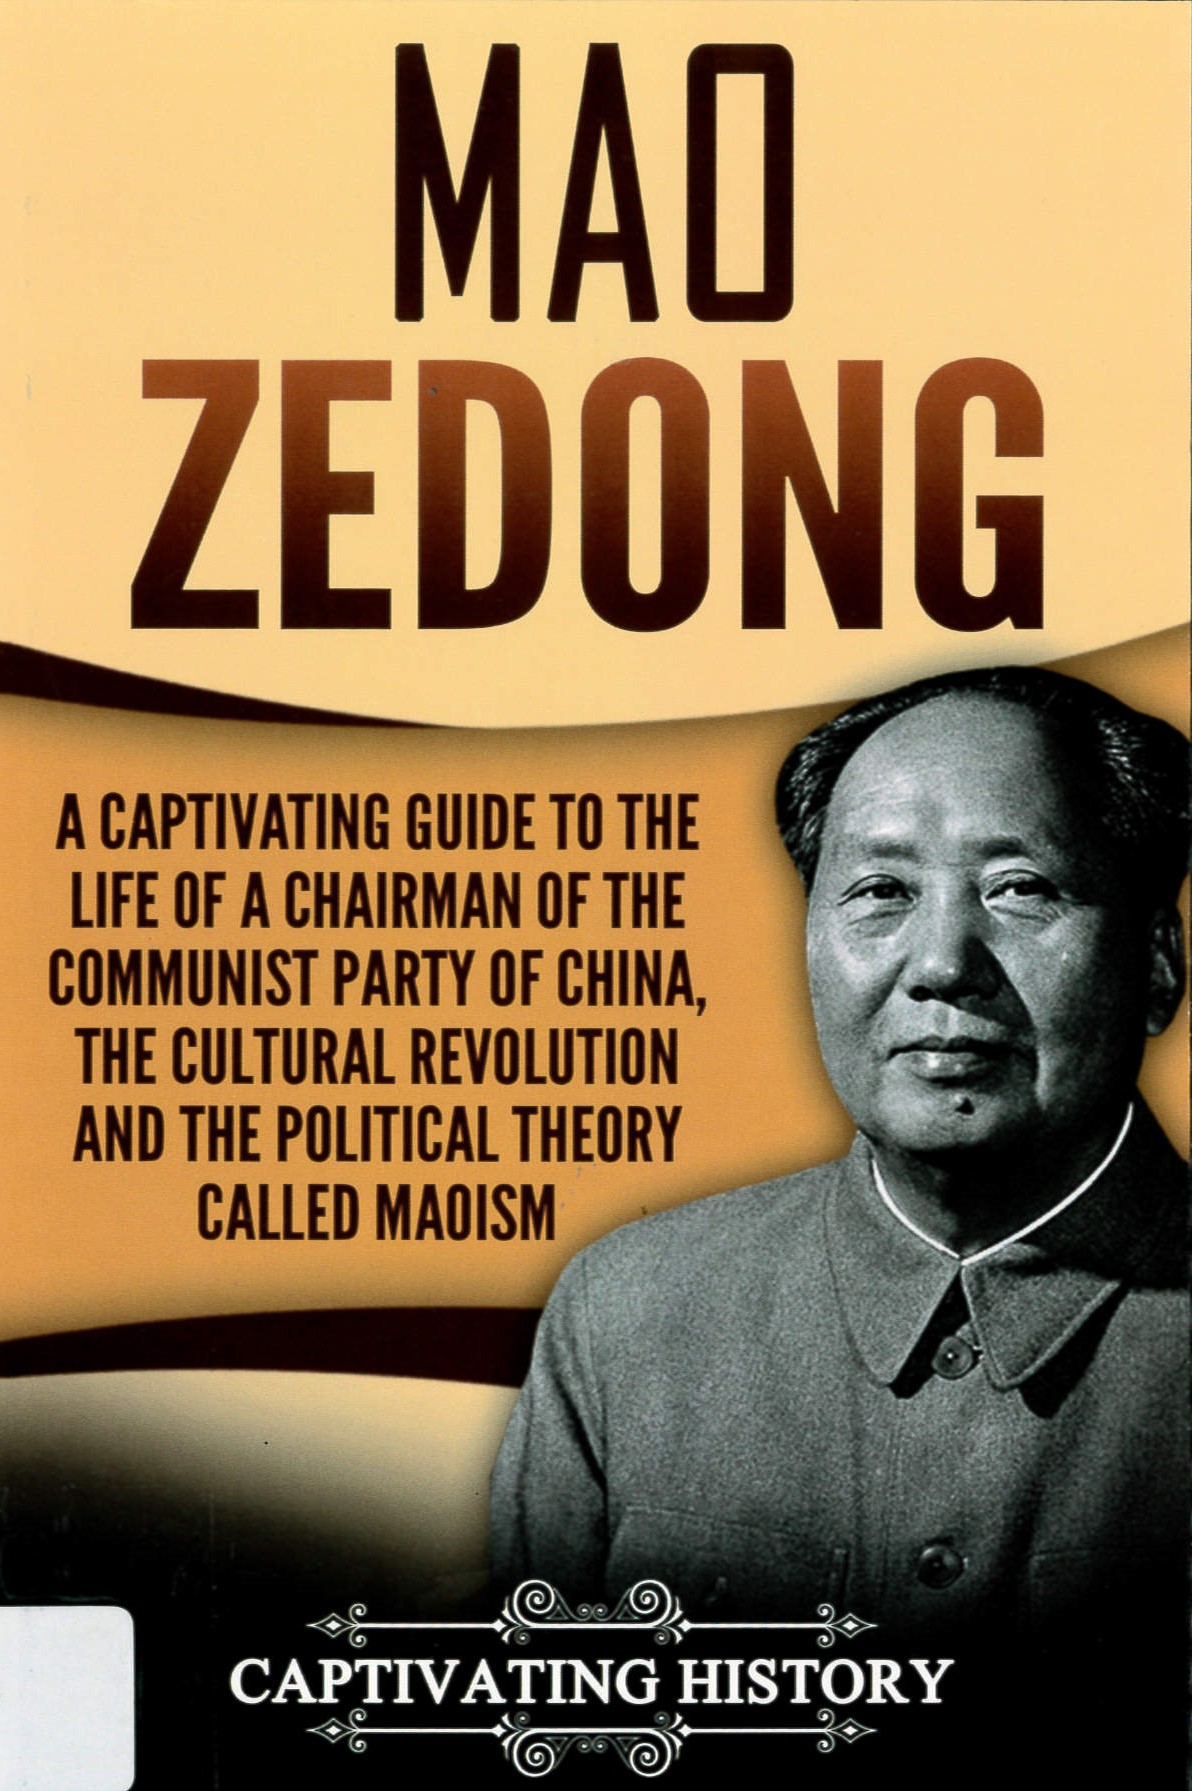 Mao Zedong : a captivating guide to the life of a chairman of the Communist Party of China, the Cultural Revolution and the political theory called Maoism.